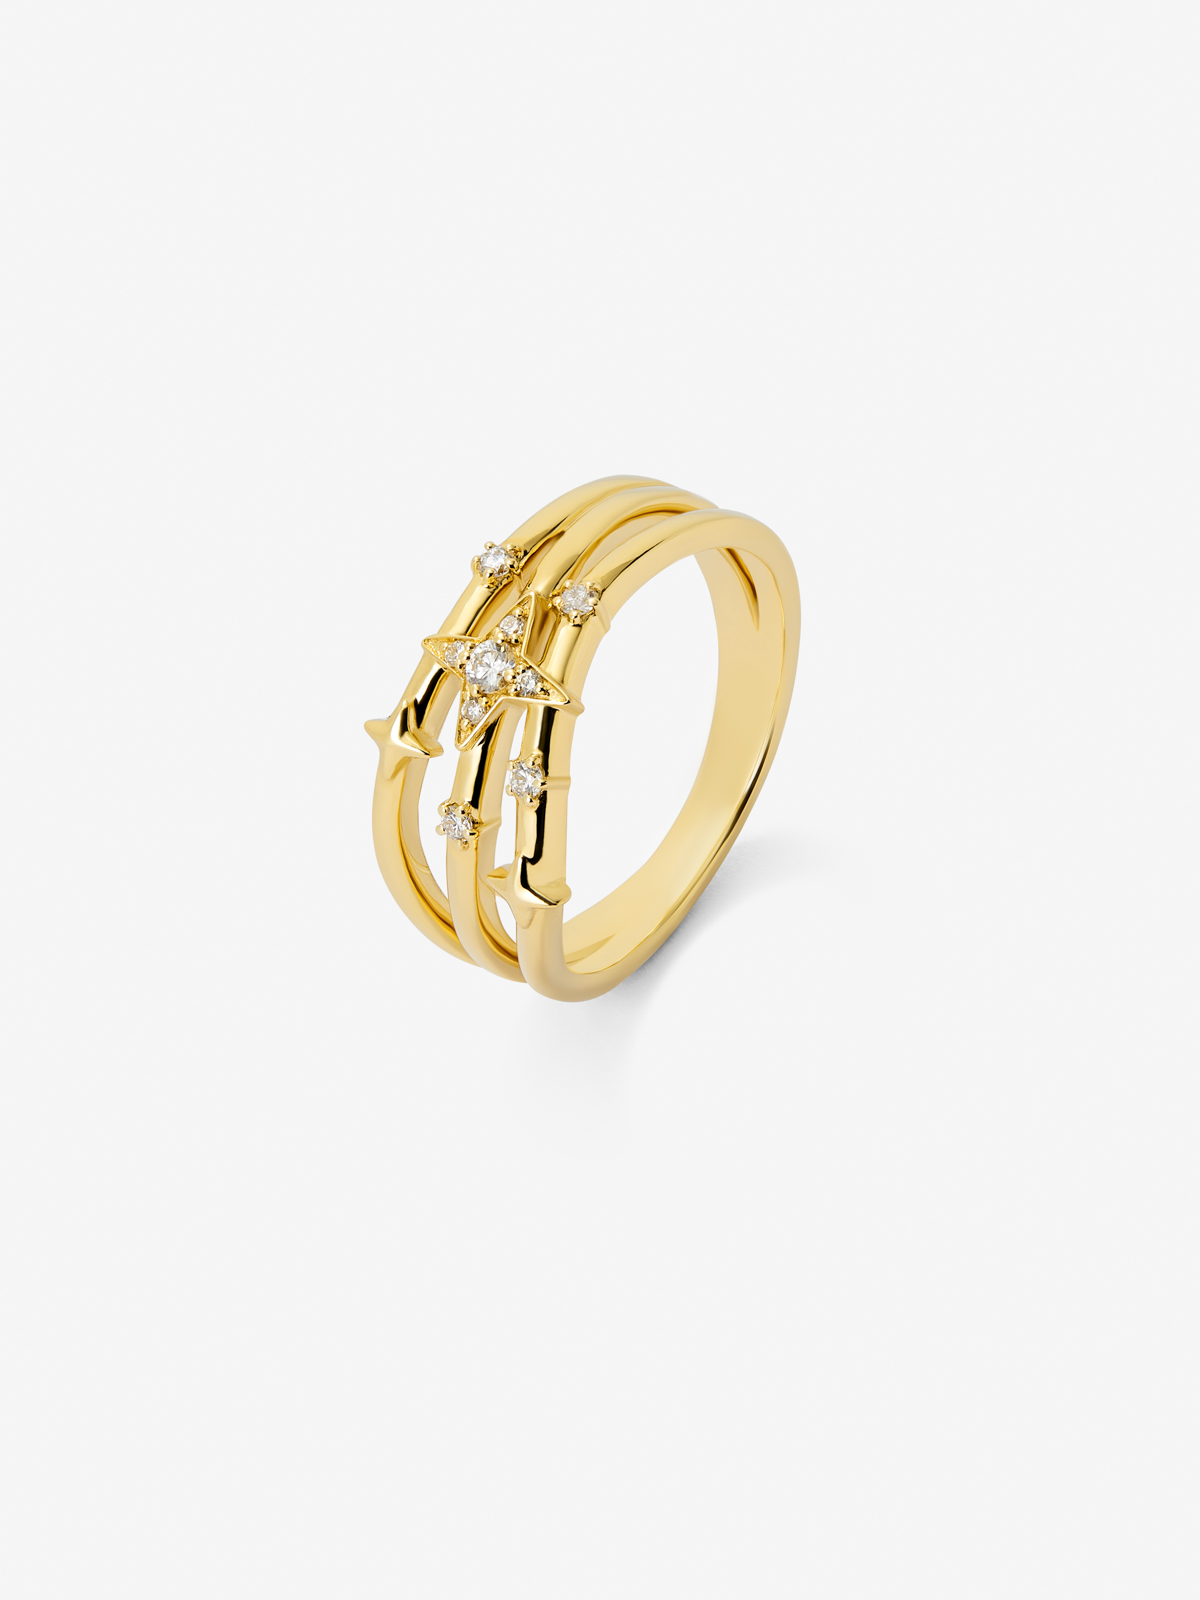 18K yellow gold multi-arm ring with 9 brilliant-cut diamonds with a total of 0.08 cts